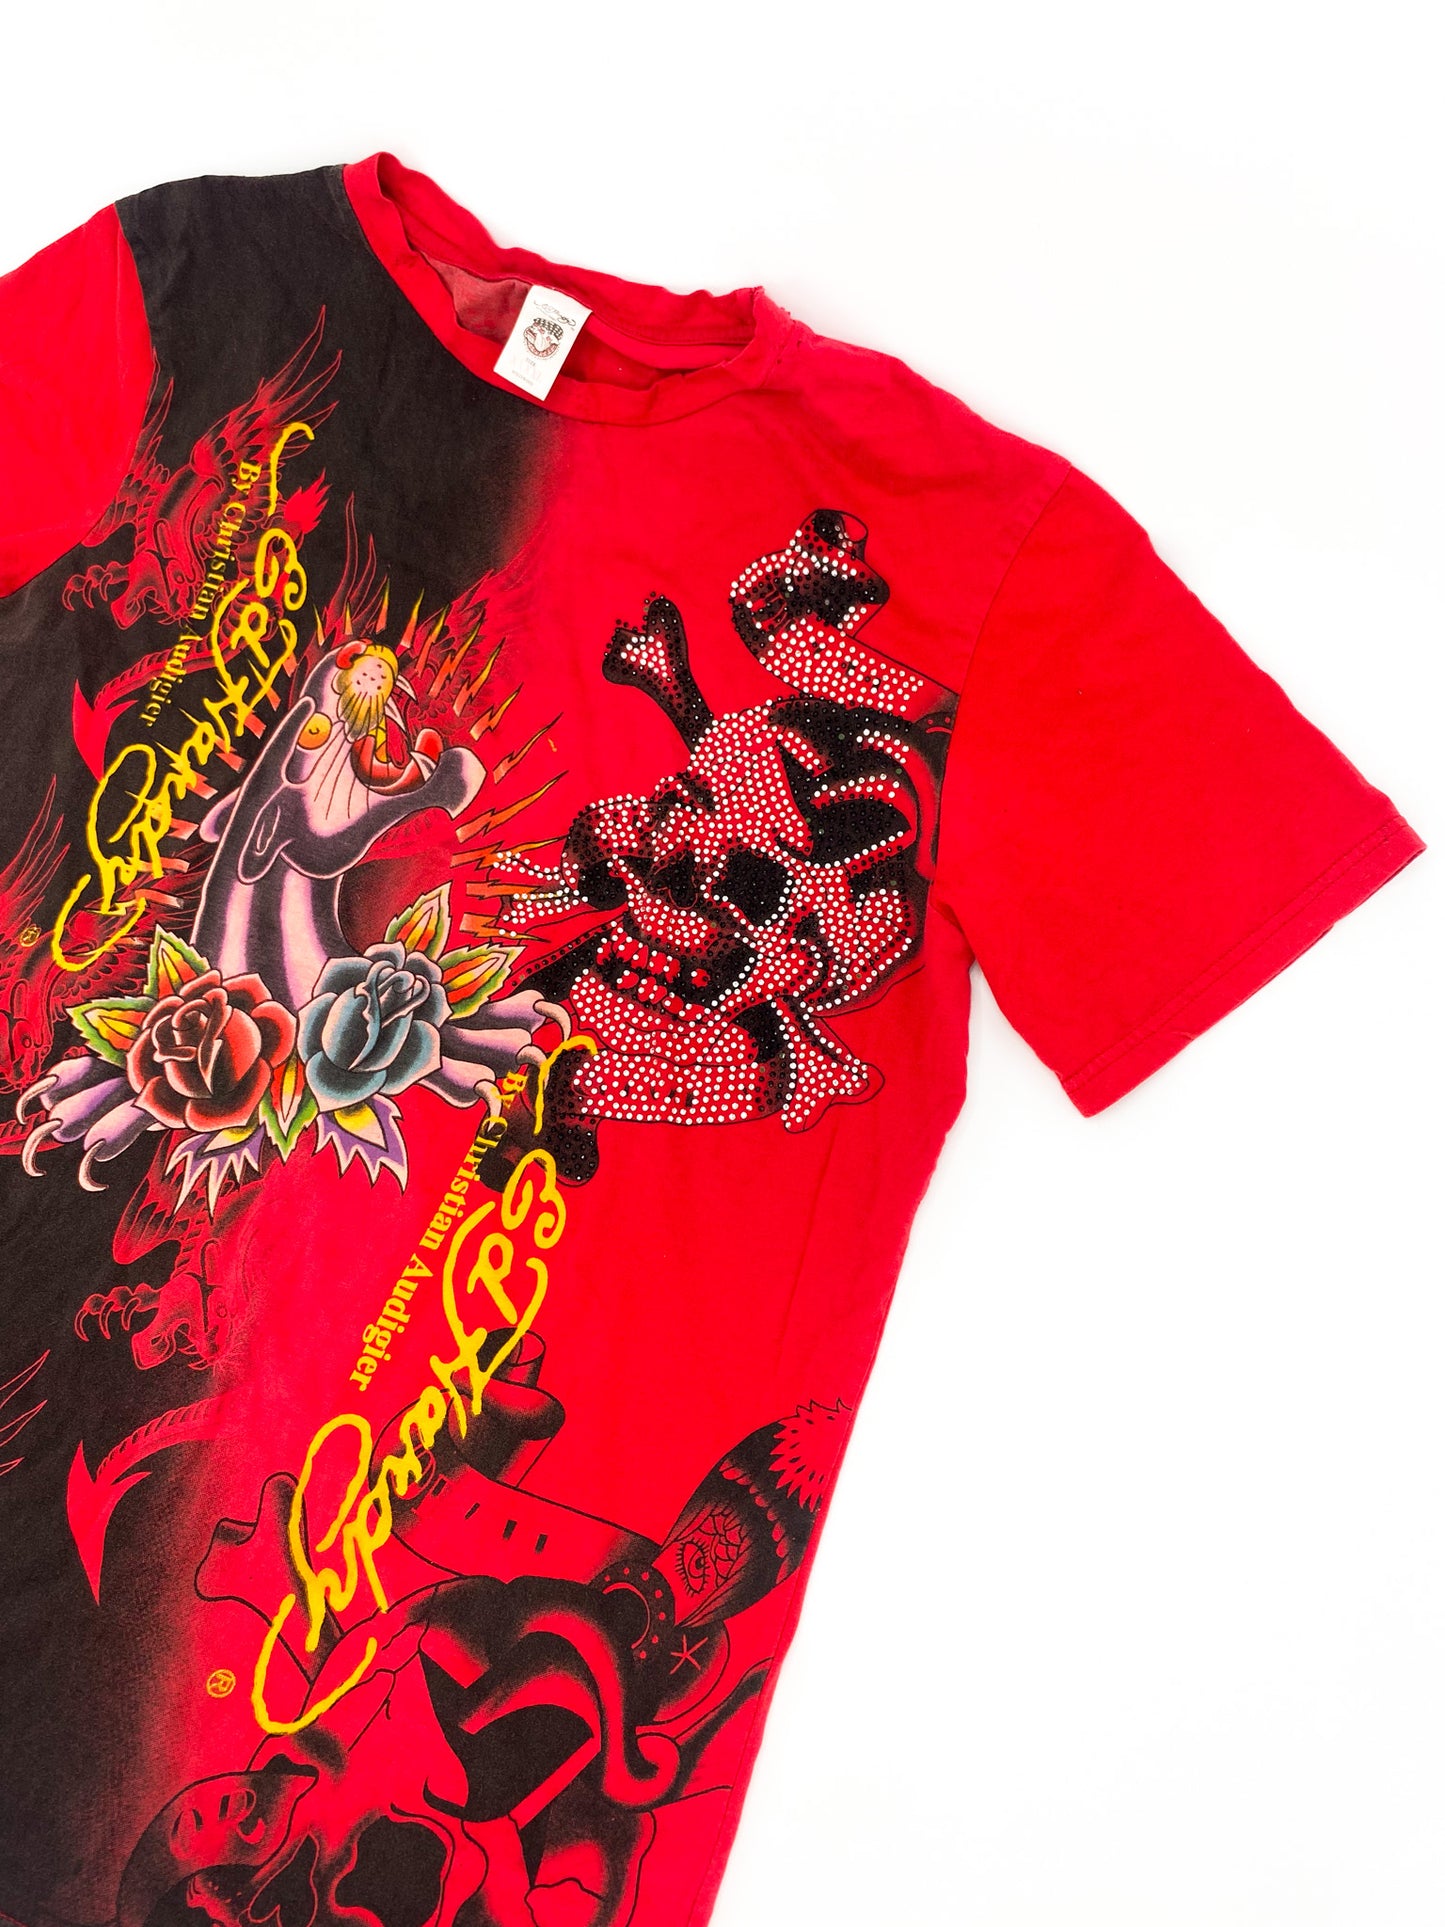 Vintage 00's Red Ed Hardy Tee - XL